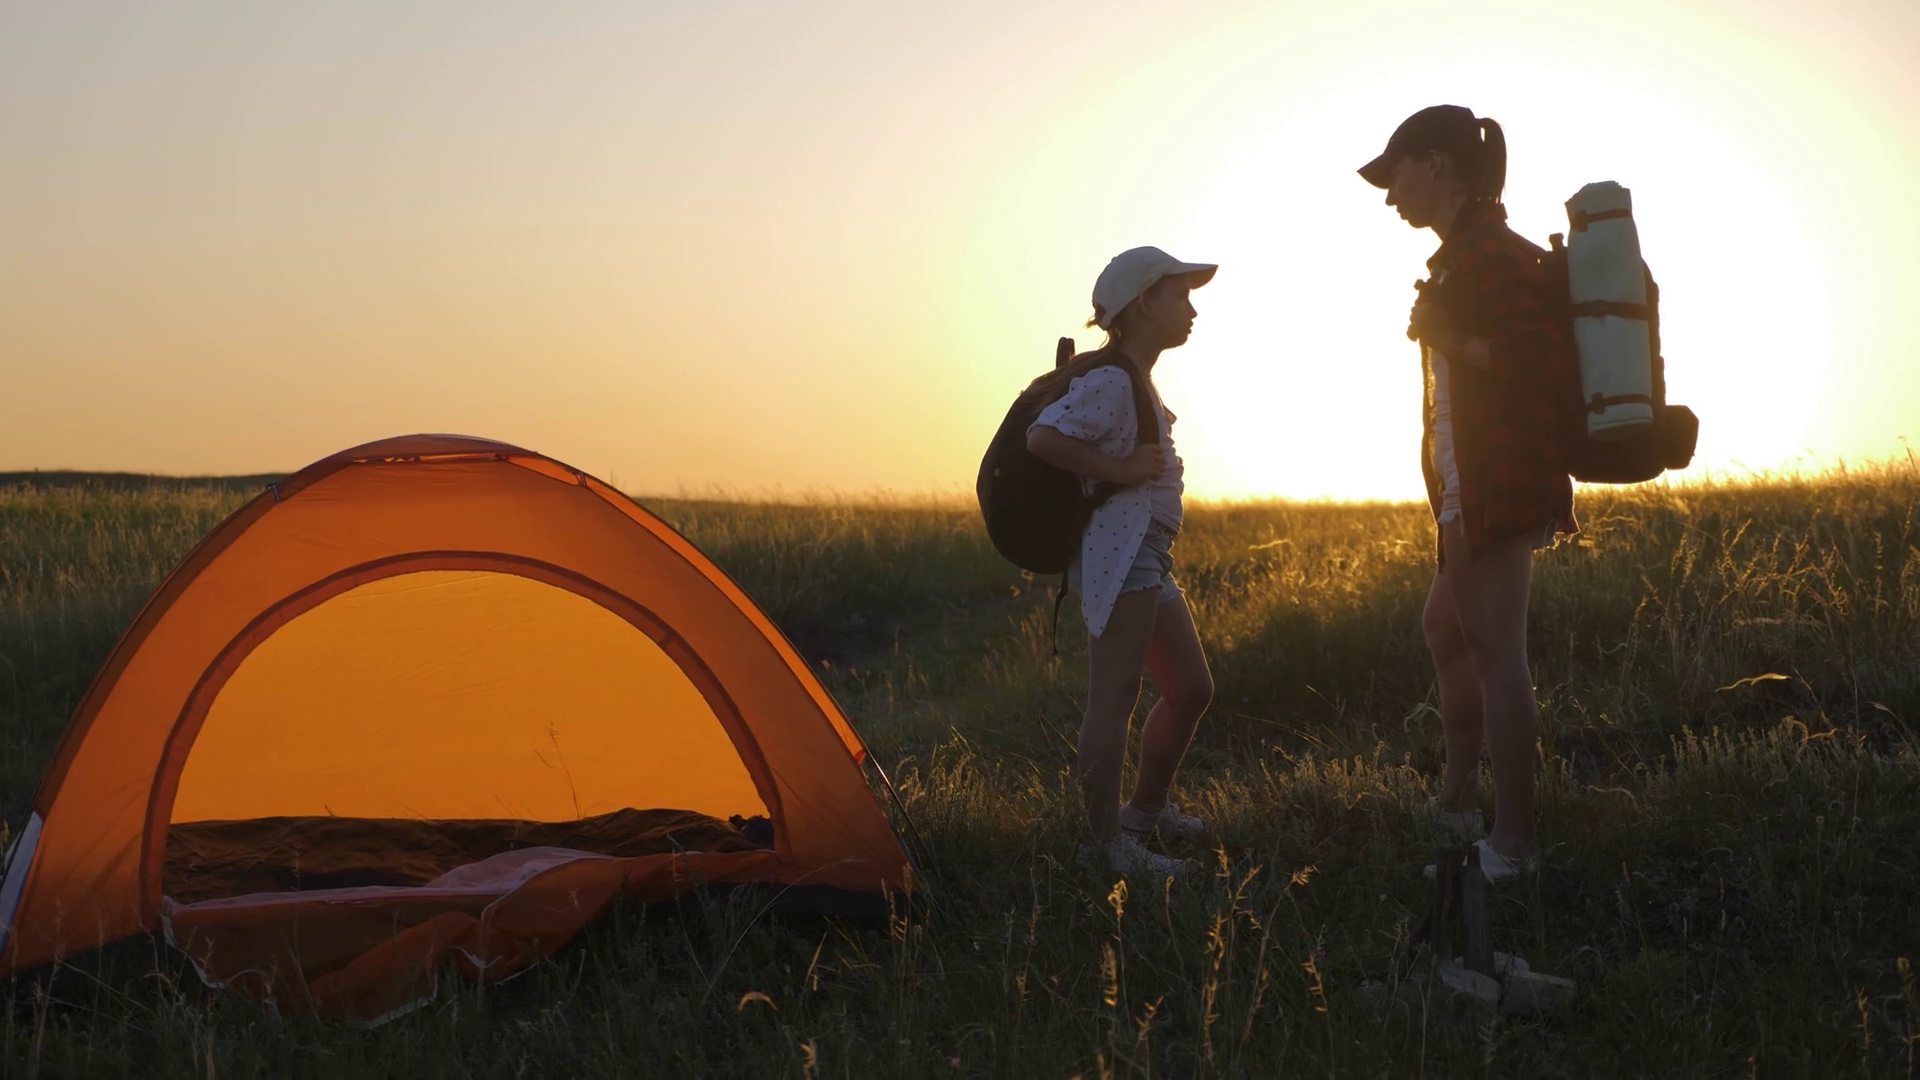 Modern Tourist Family Camping In Mountains At Sunset. Silhouette Mother And Daughter Resting In A Tent Camp. Tourism And Traveling Concept. Stock Video Footage 00:23 SBV 338590451